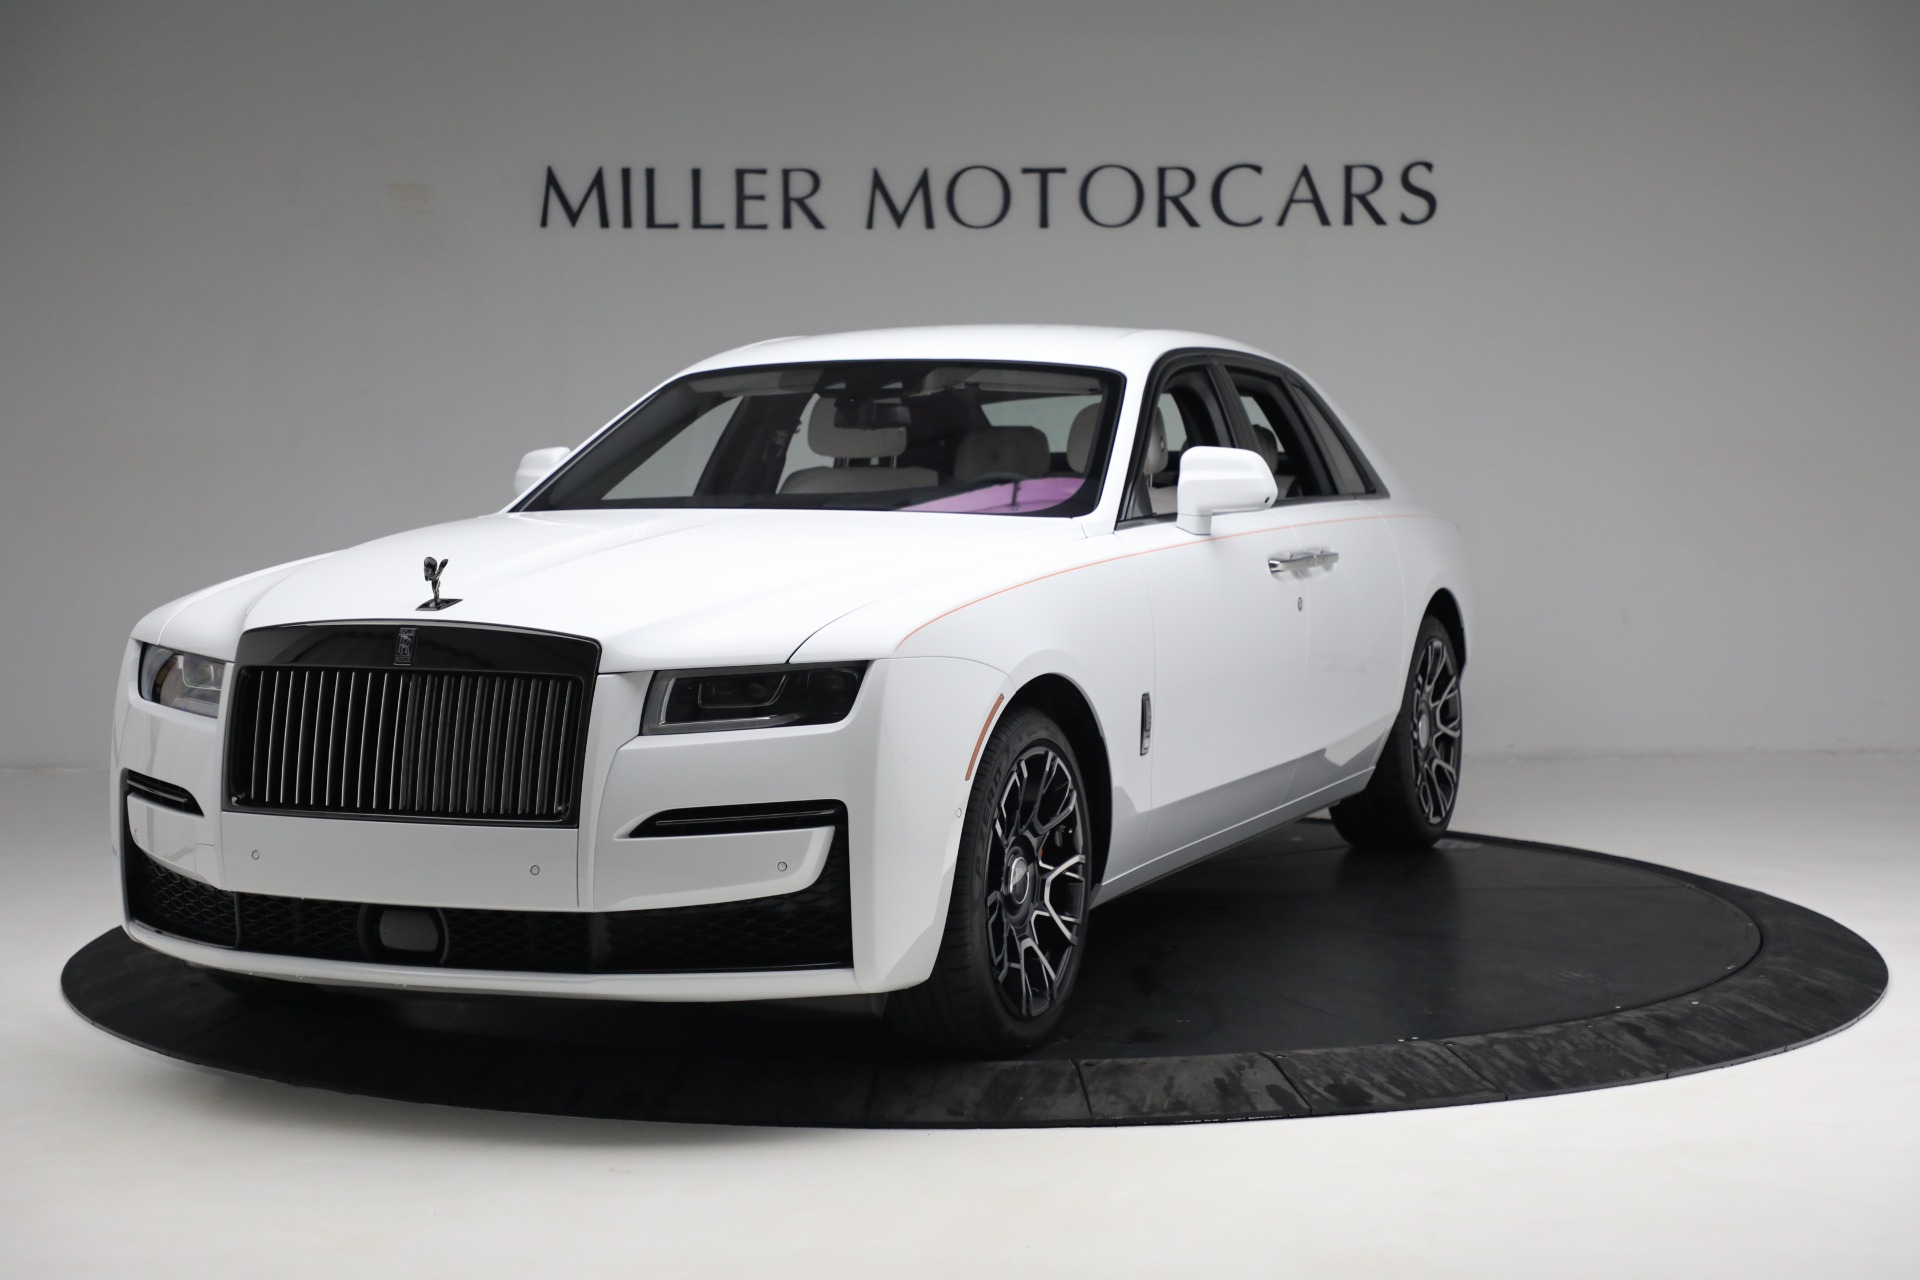 Amazoncom Alloy Collectible White Rolls Royce Phantom Toy Pull Back  Vehicles Diecast Model Car  Toys  Games